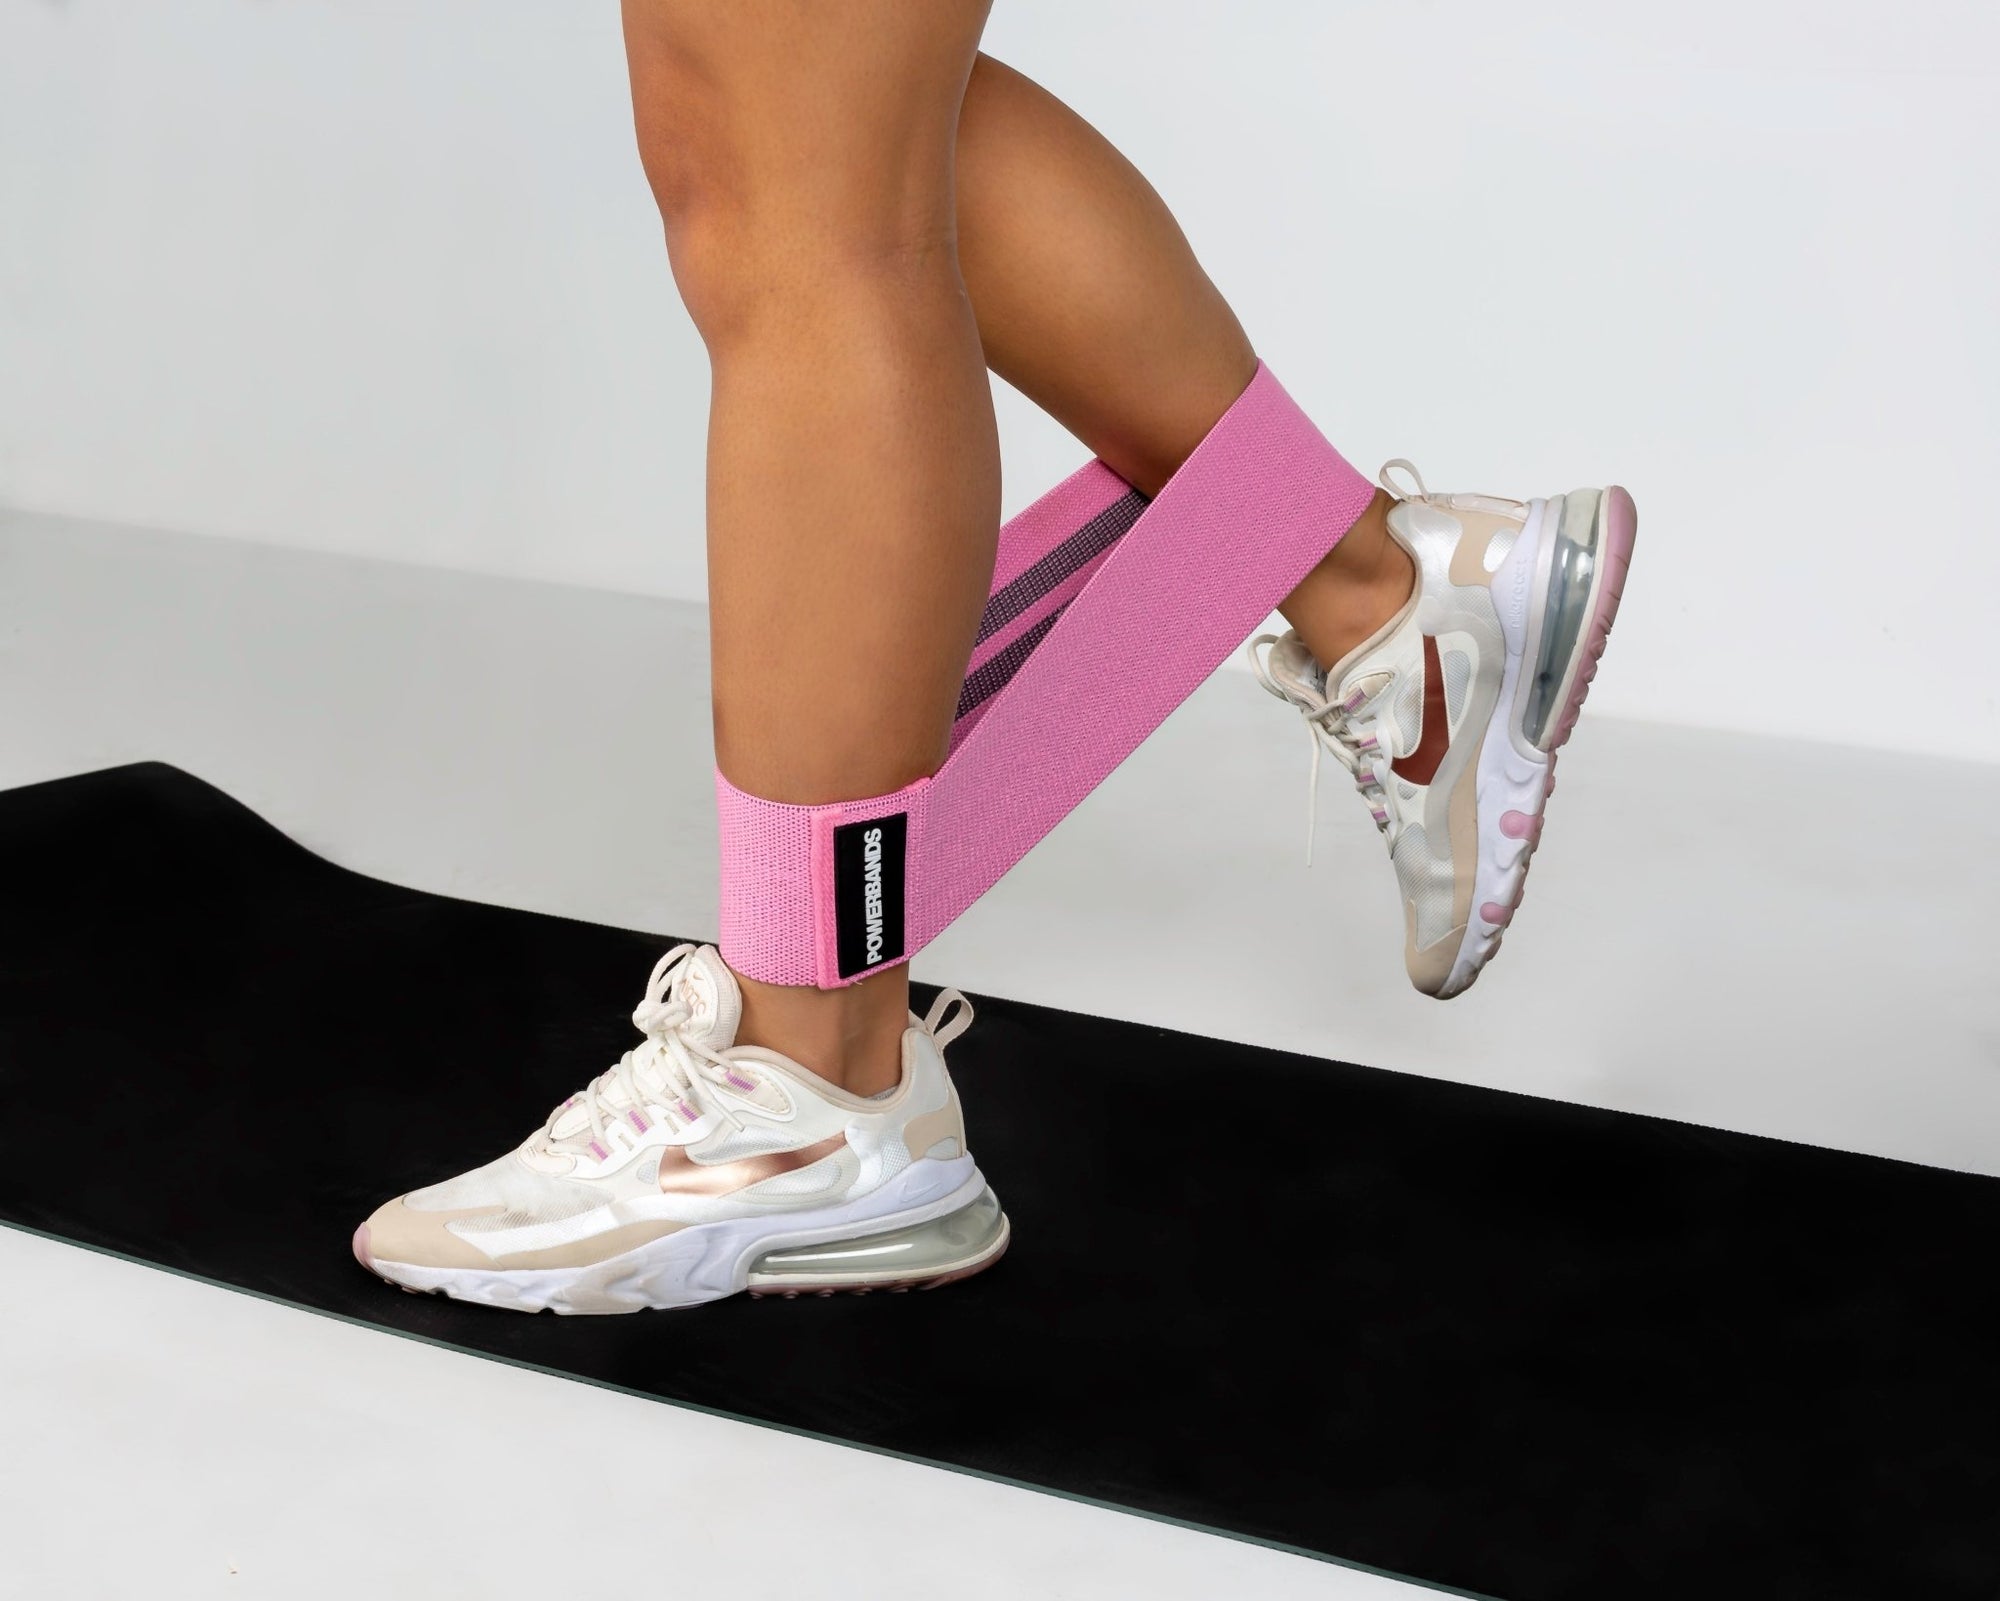 Here's How Resistance Band Training Can Minimise Workout Injuries - POWERBANDS®